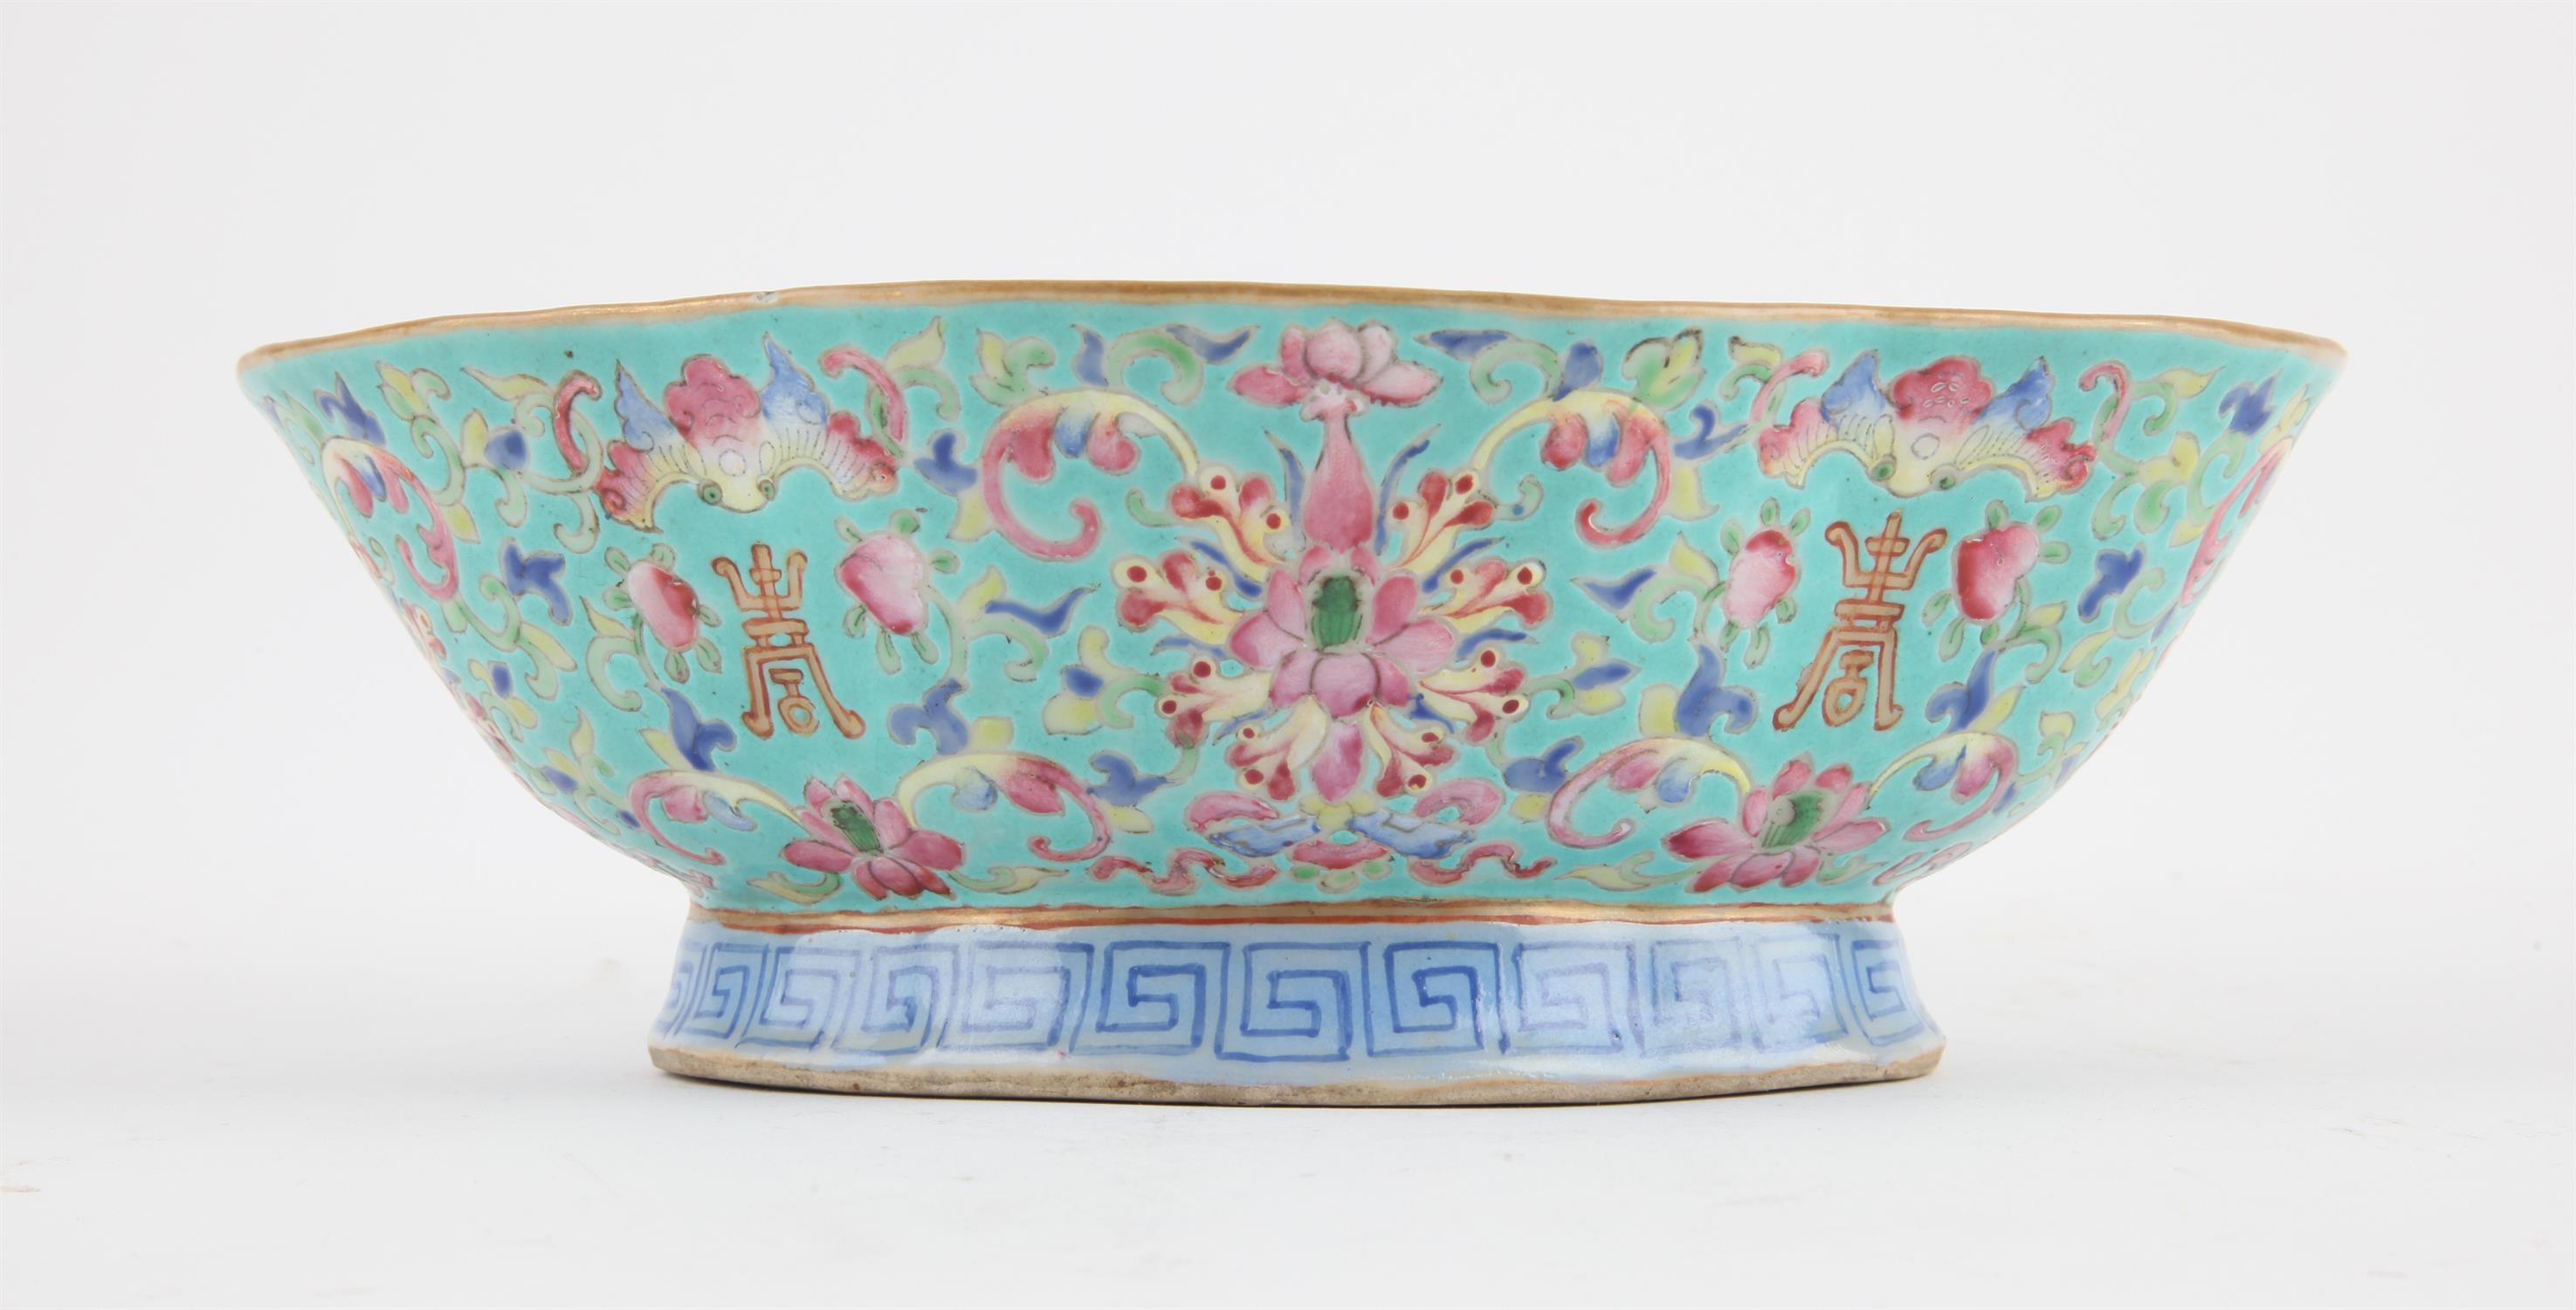 A Chinese Lobed Pedestal Bowl, Qing dynasty Painted with flowers , bats and the Shou longevity - Image 3 of 8